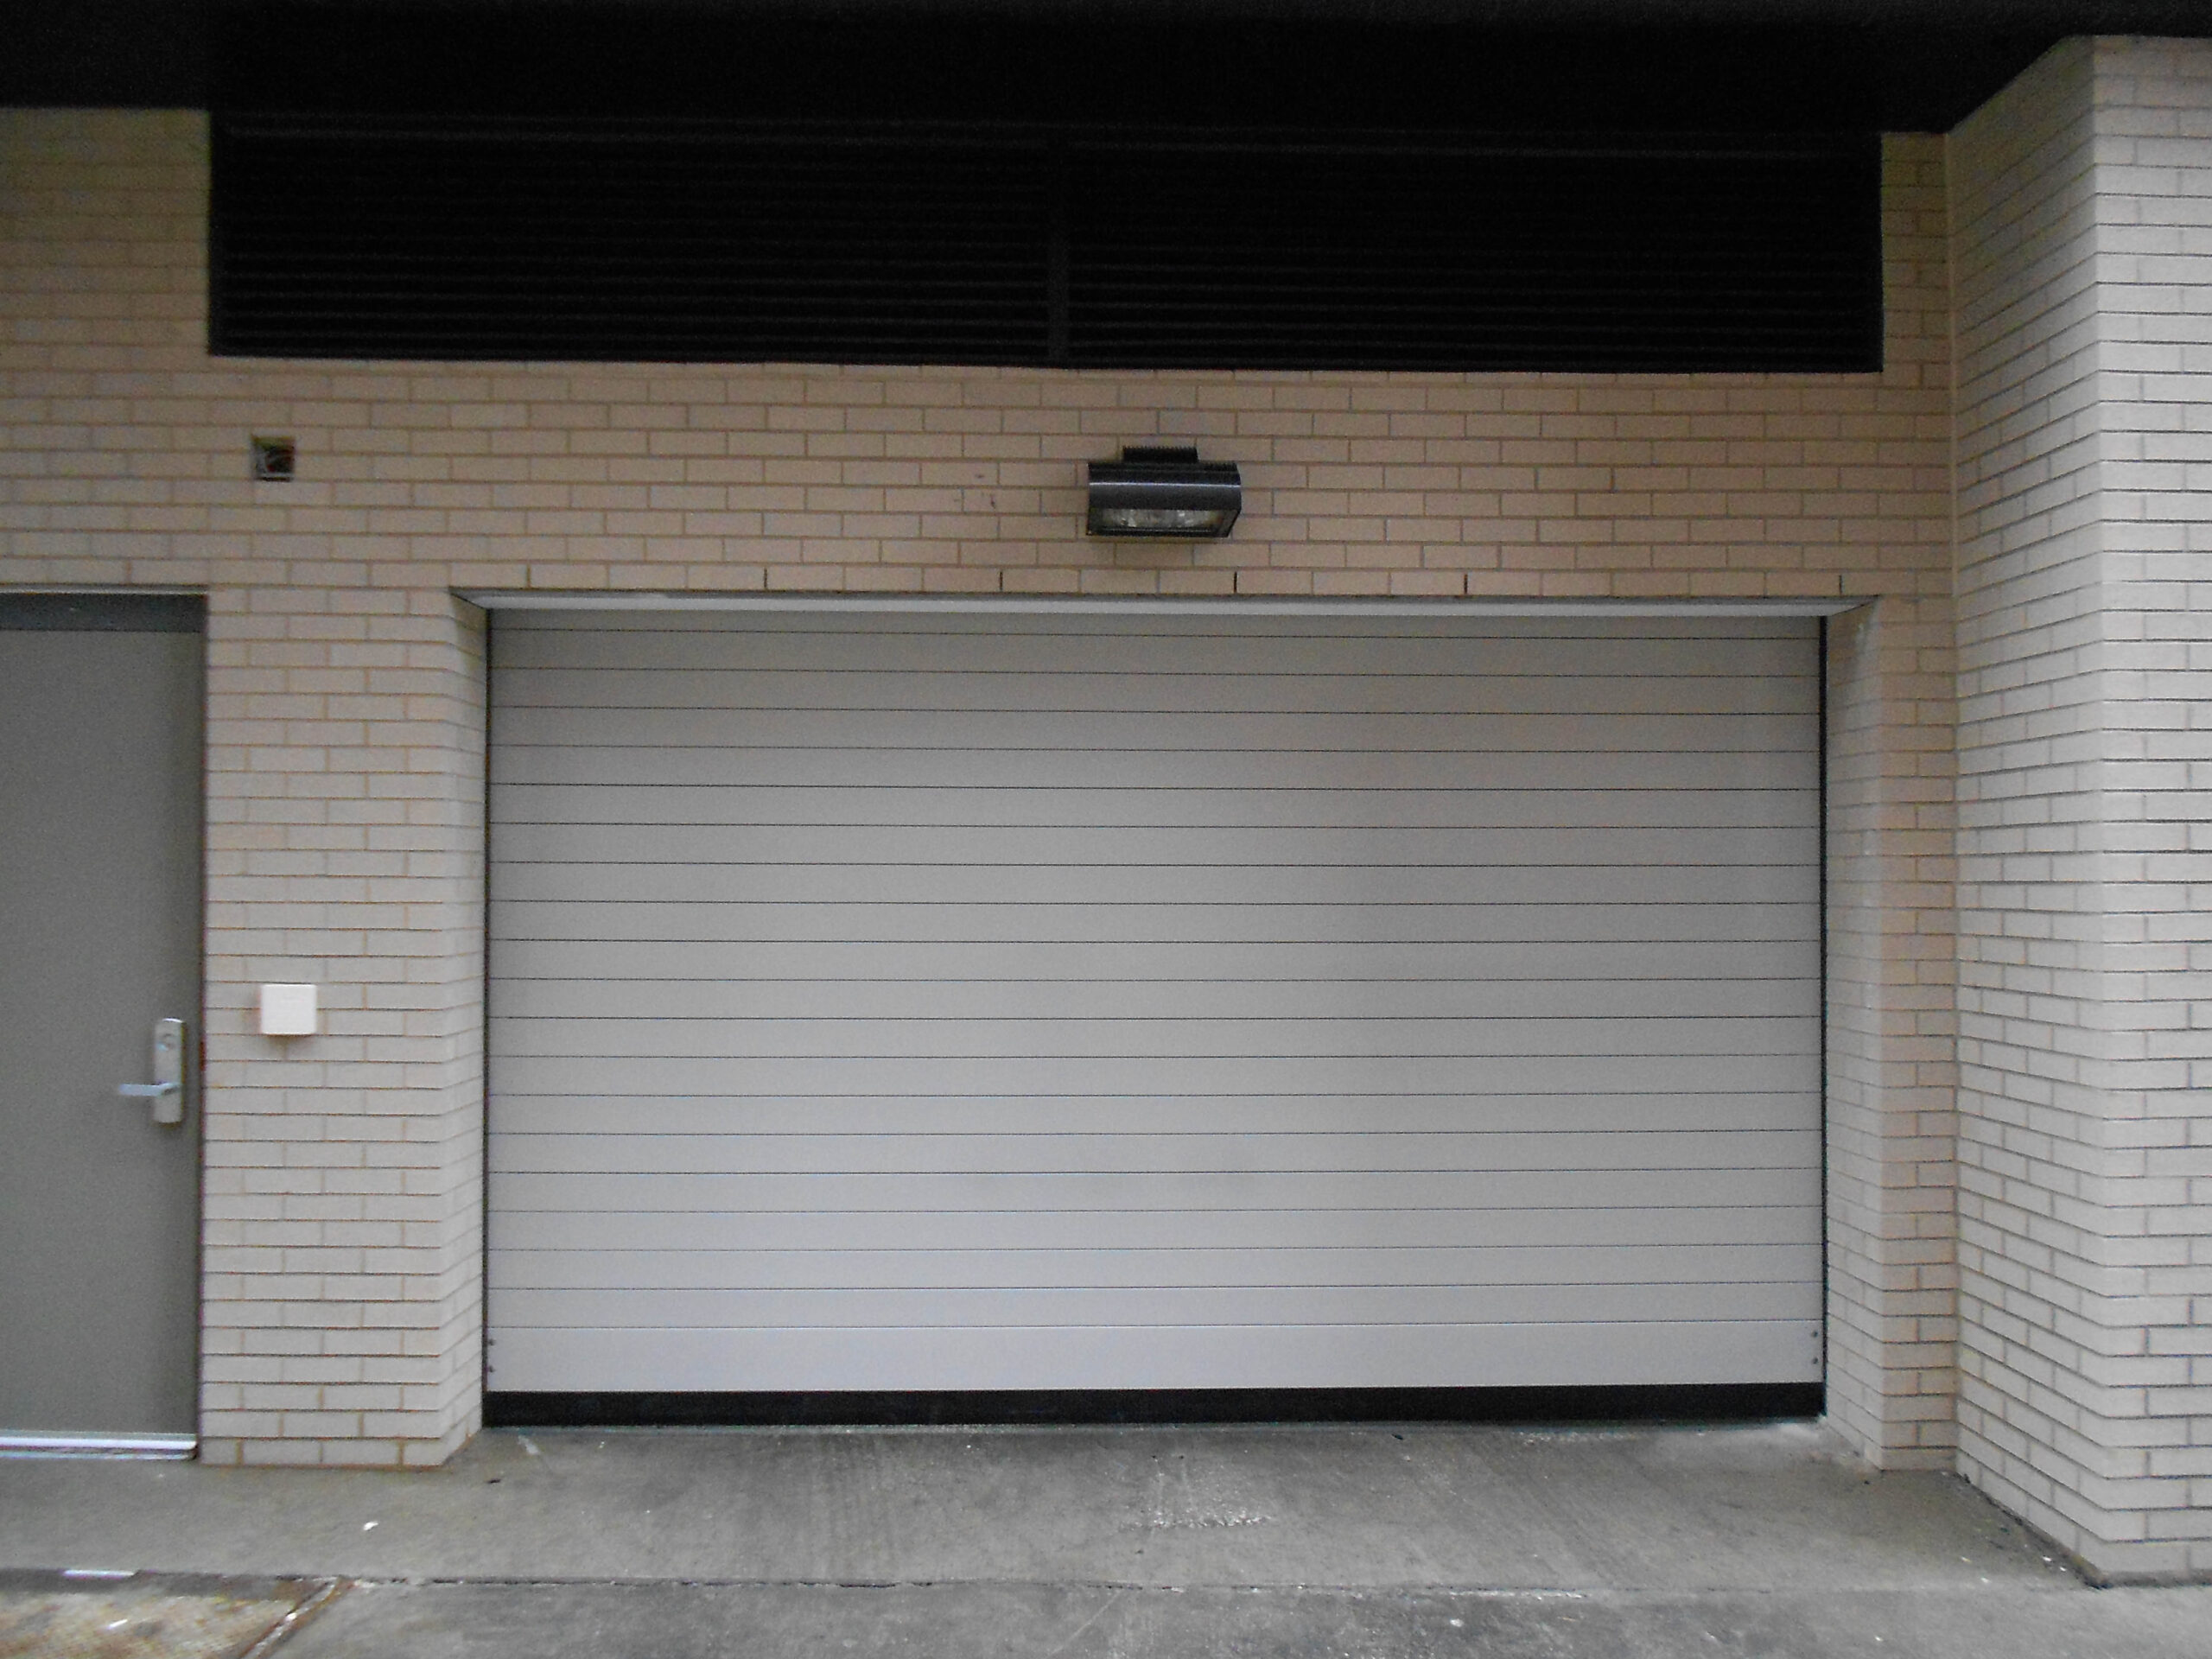 White Brick Parking Facility Building with Closed Garage Door